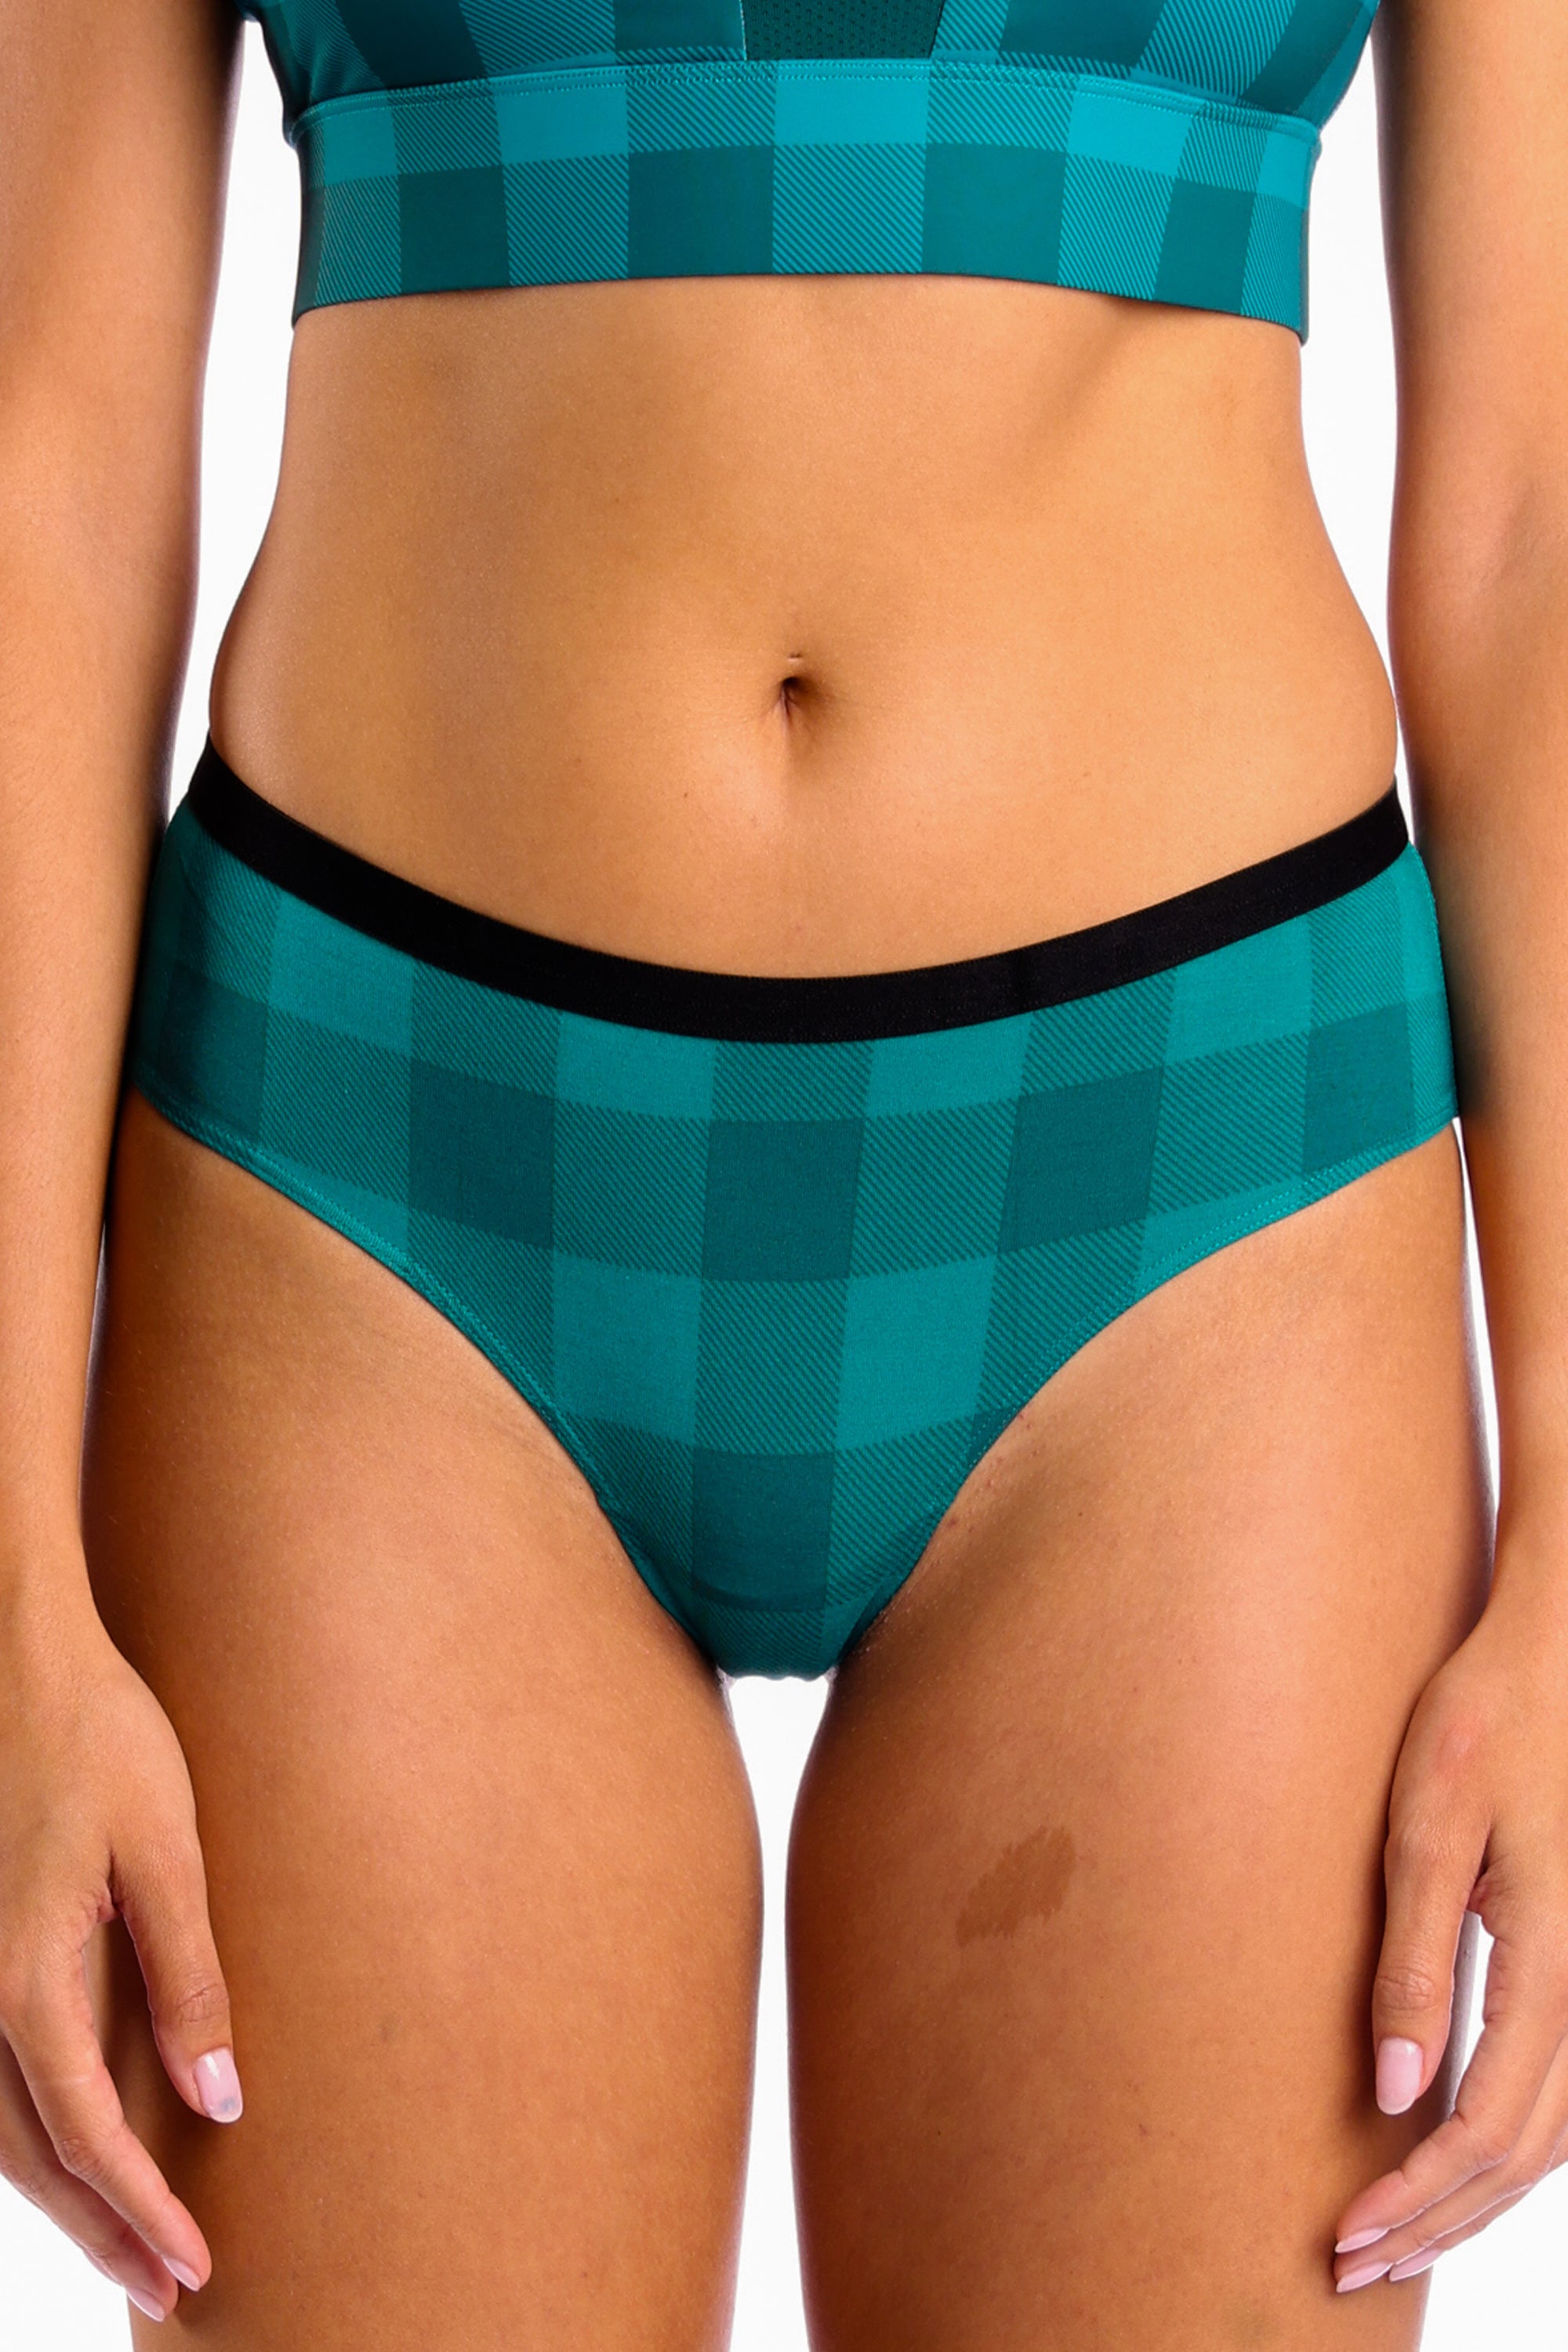 Simply Comfy Buffalo Plaid Cotton Hipster Panty